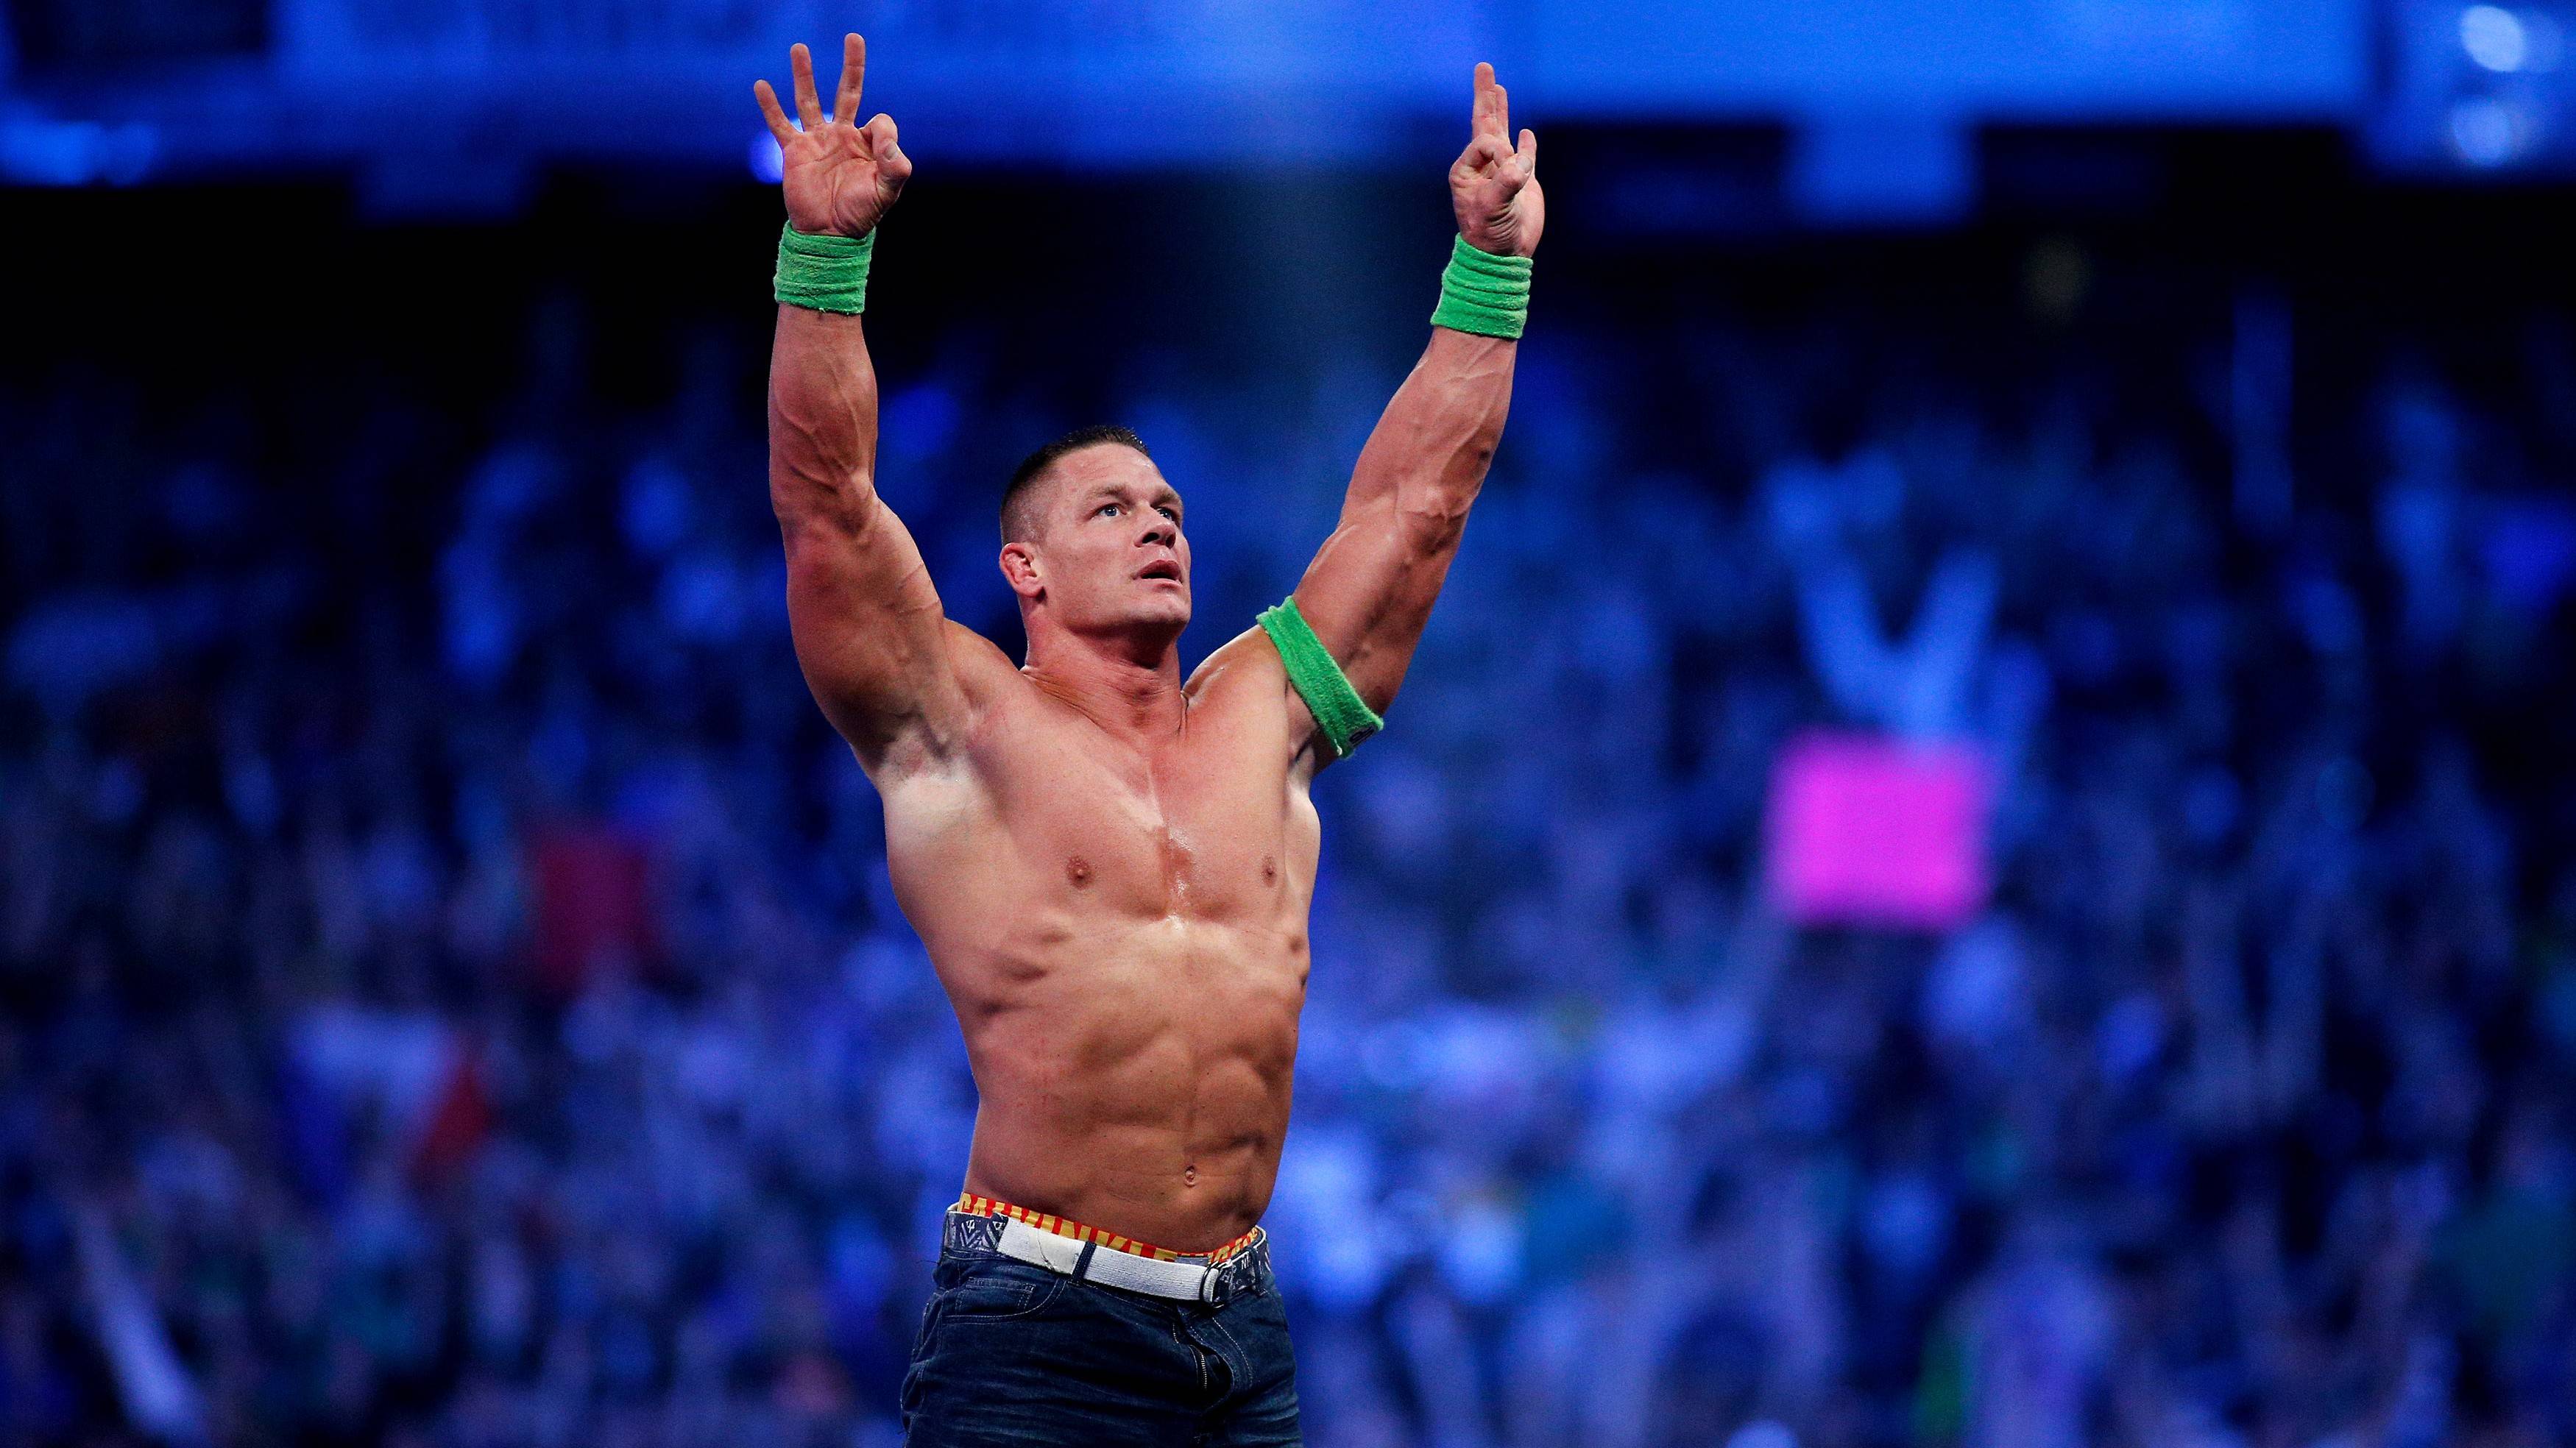 Wwe Superstar John Cena Latest Hd And New Widescreen Full Image In.